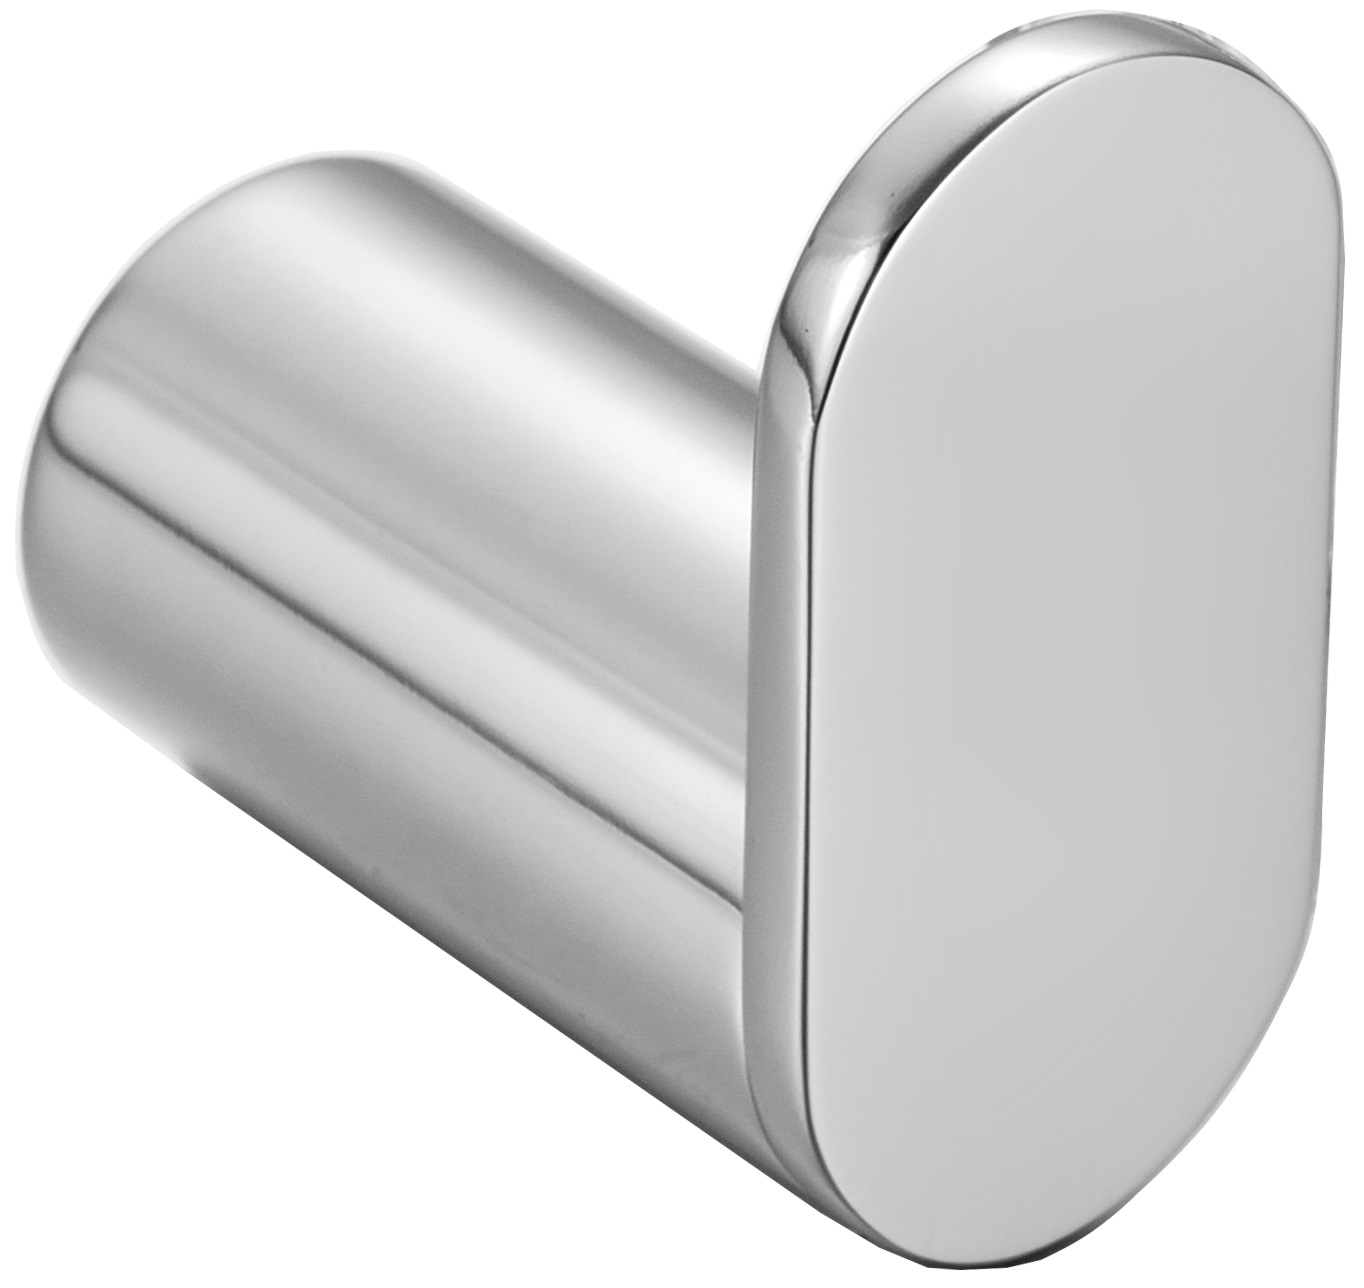 Bathroom Robe Hook Made Of Aisi 304 Stainless Steel With Satin Finish